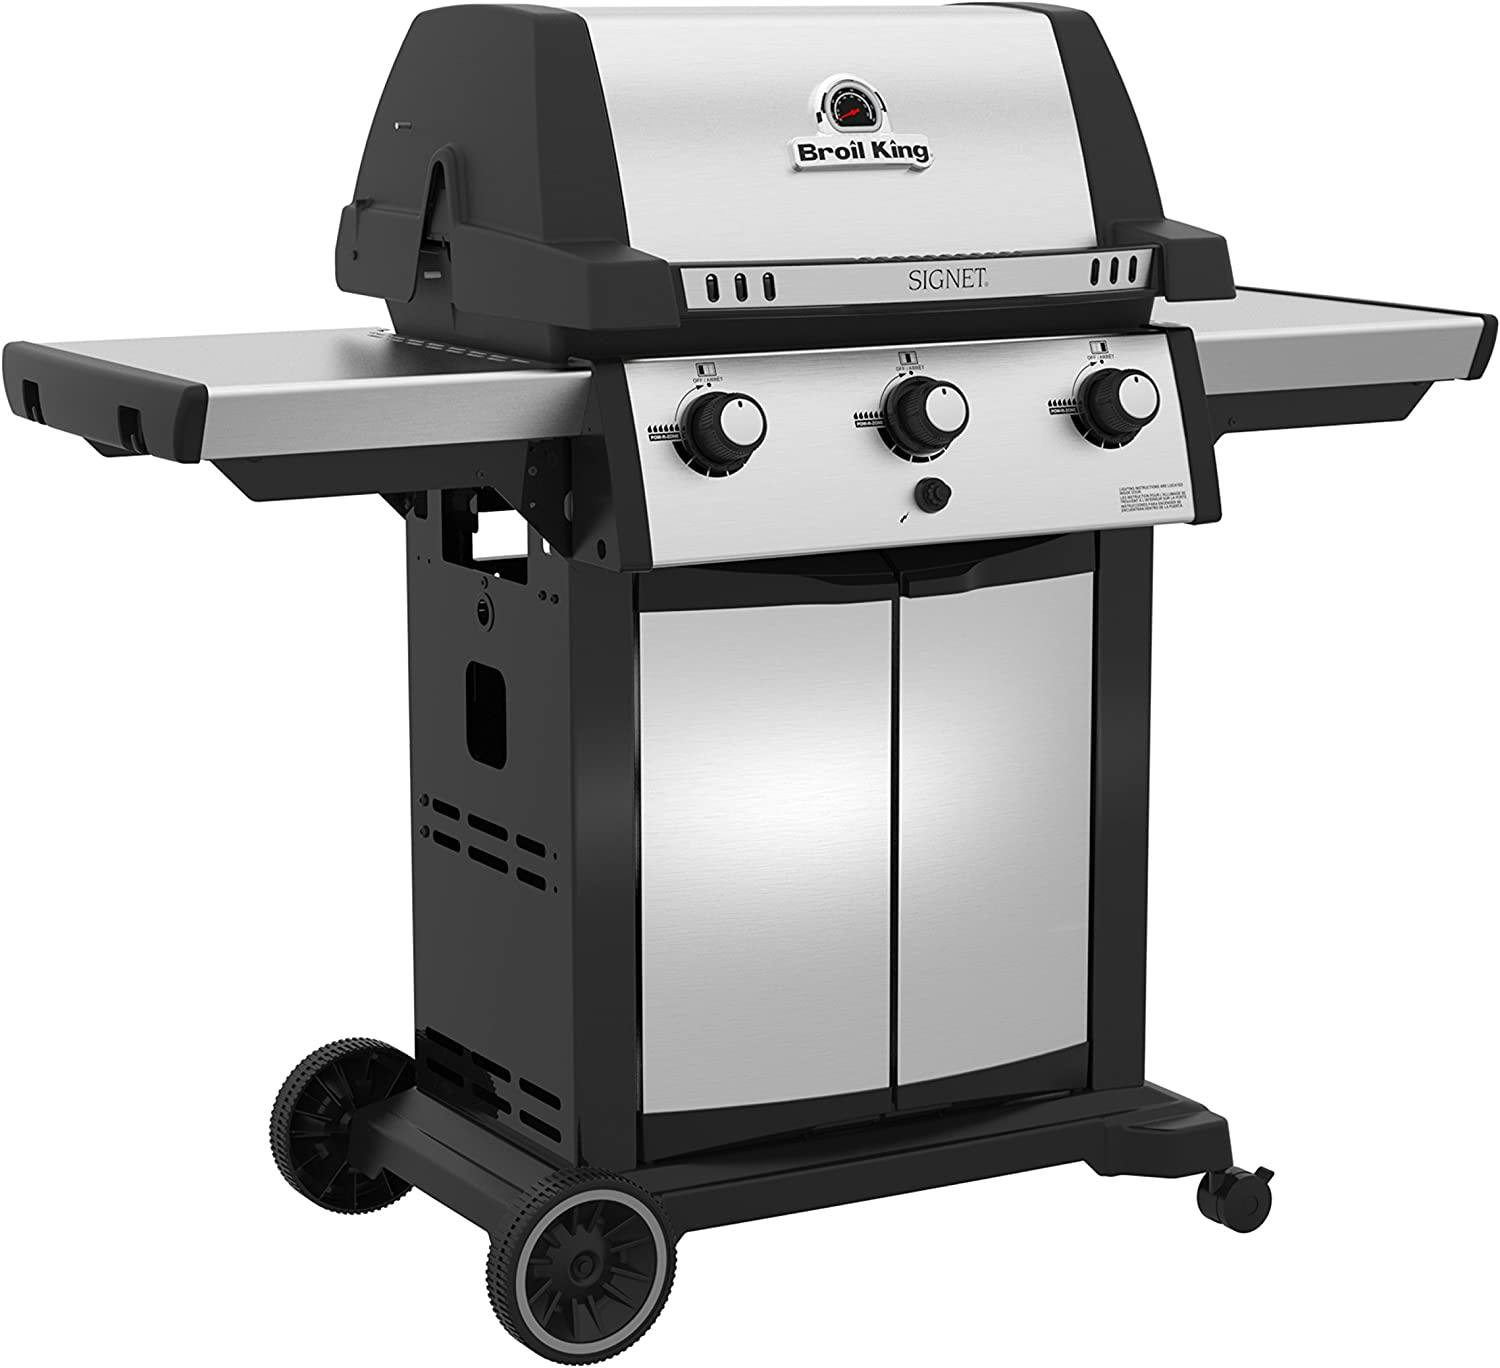 Broil King Signet 320 Gas Grill · Propane